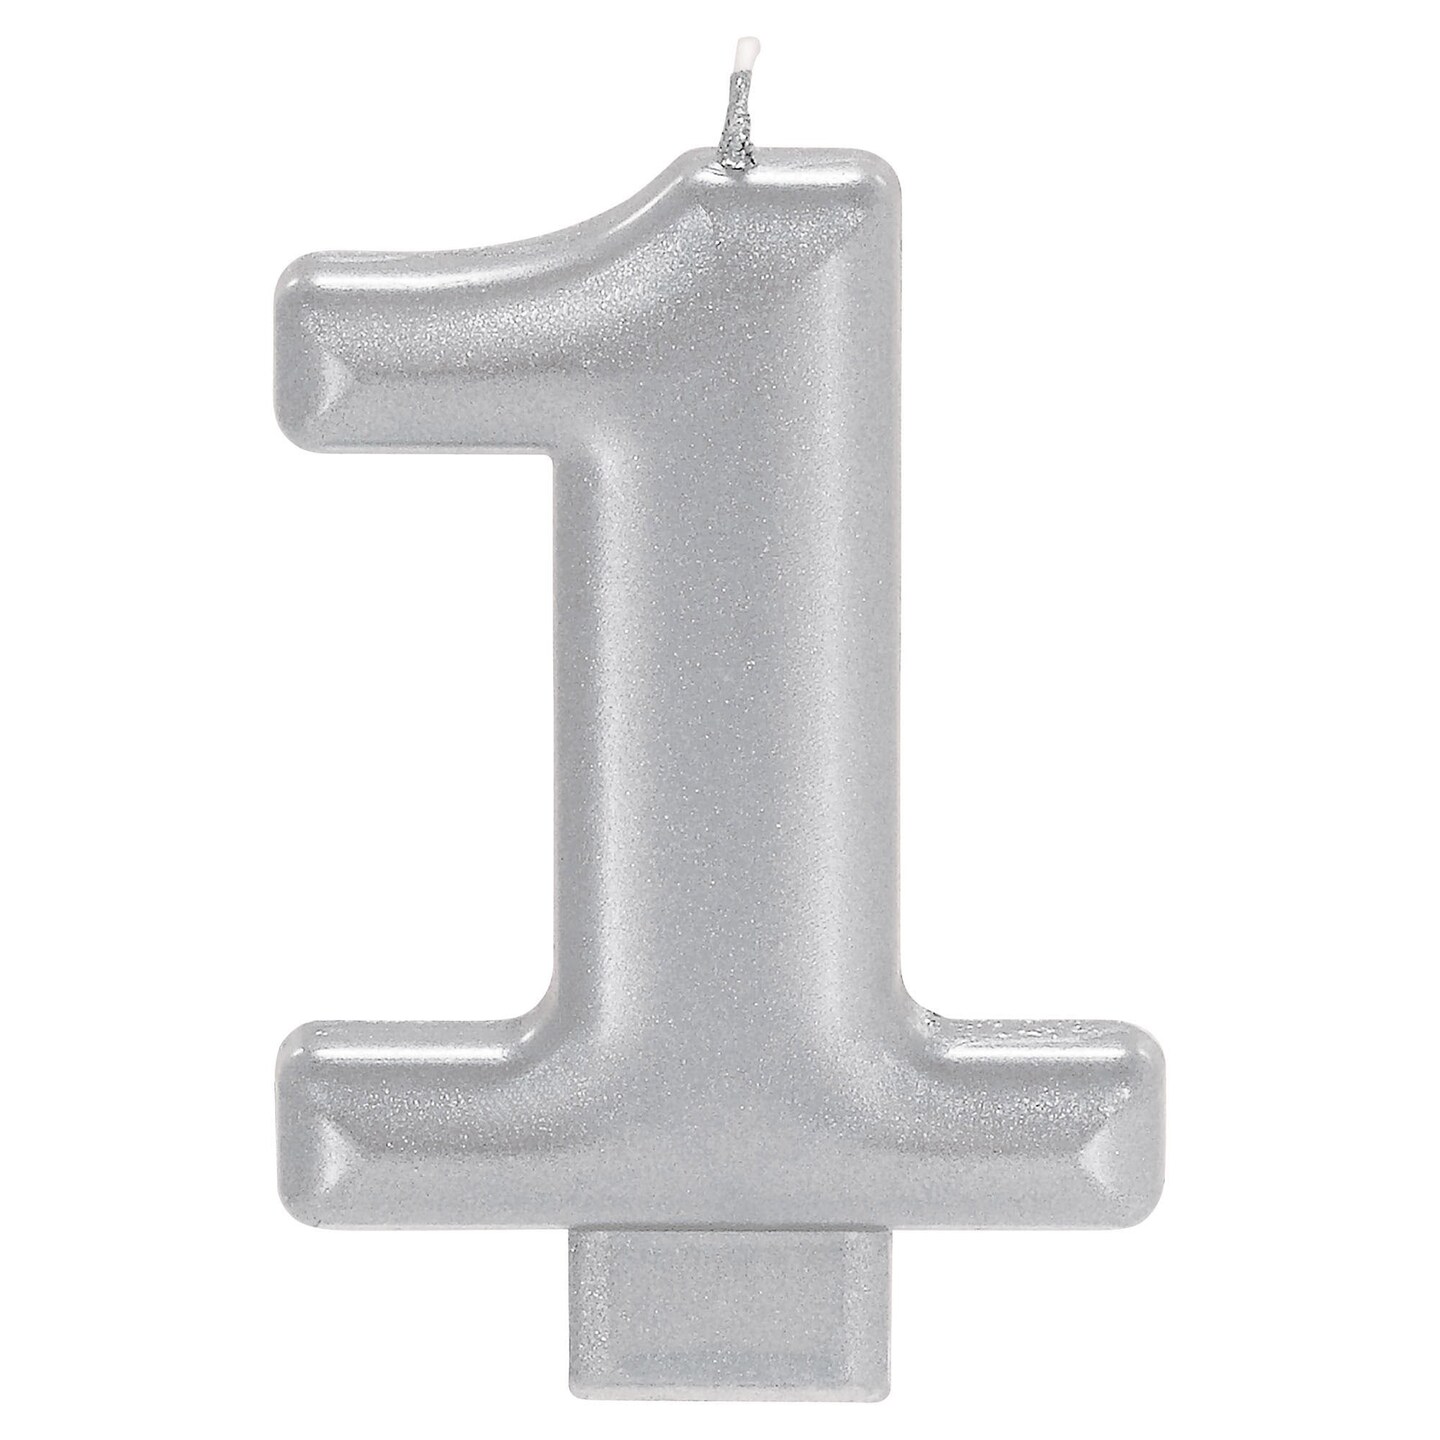 Numeral Metallic Birthday Candle #1 - Silver, 1ct